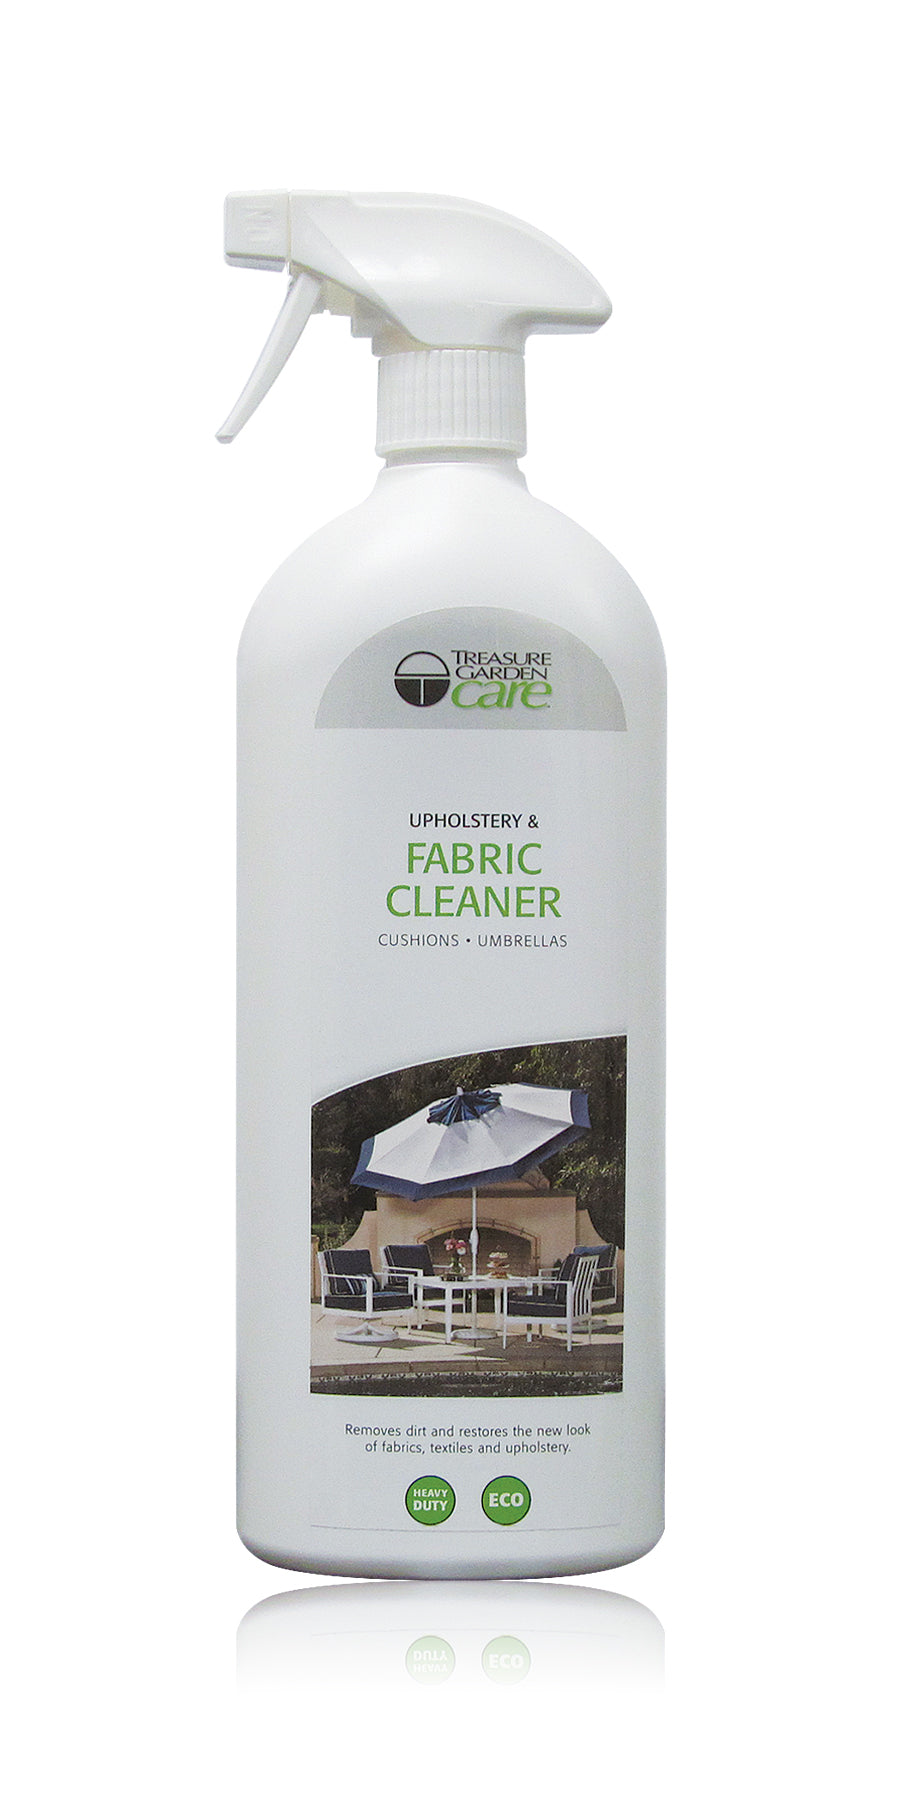 Upholstery and Fabric Cleaner by Treasure Garden